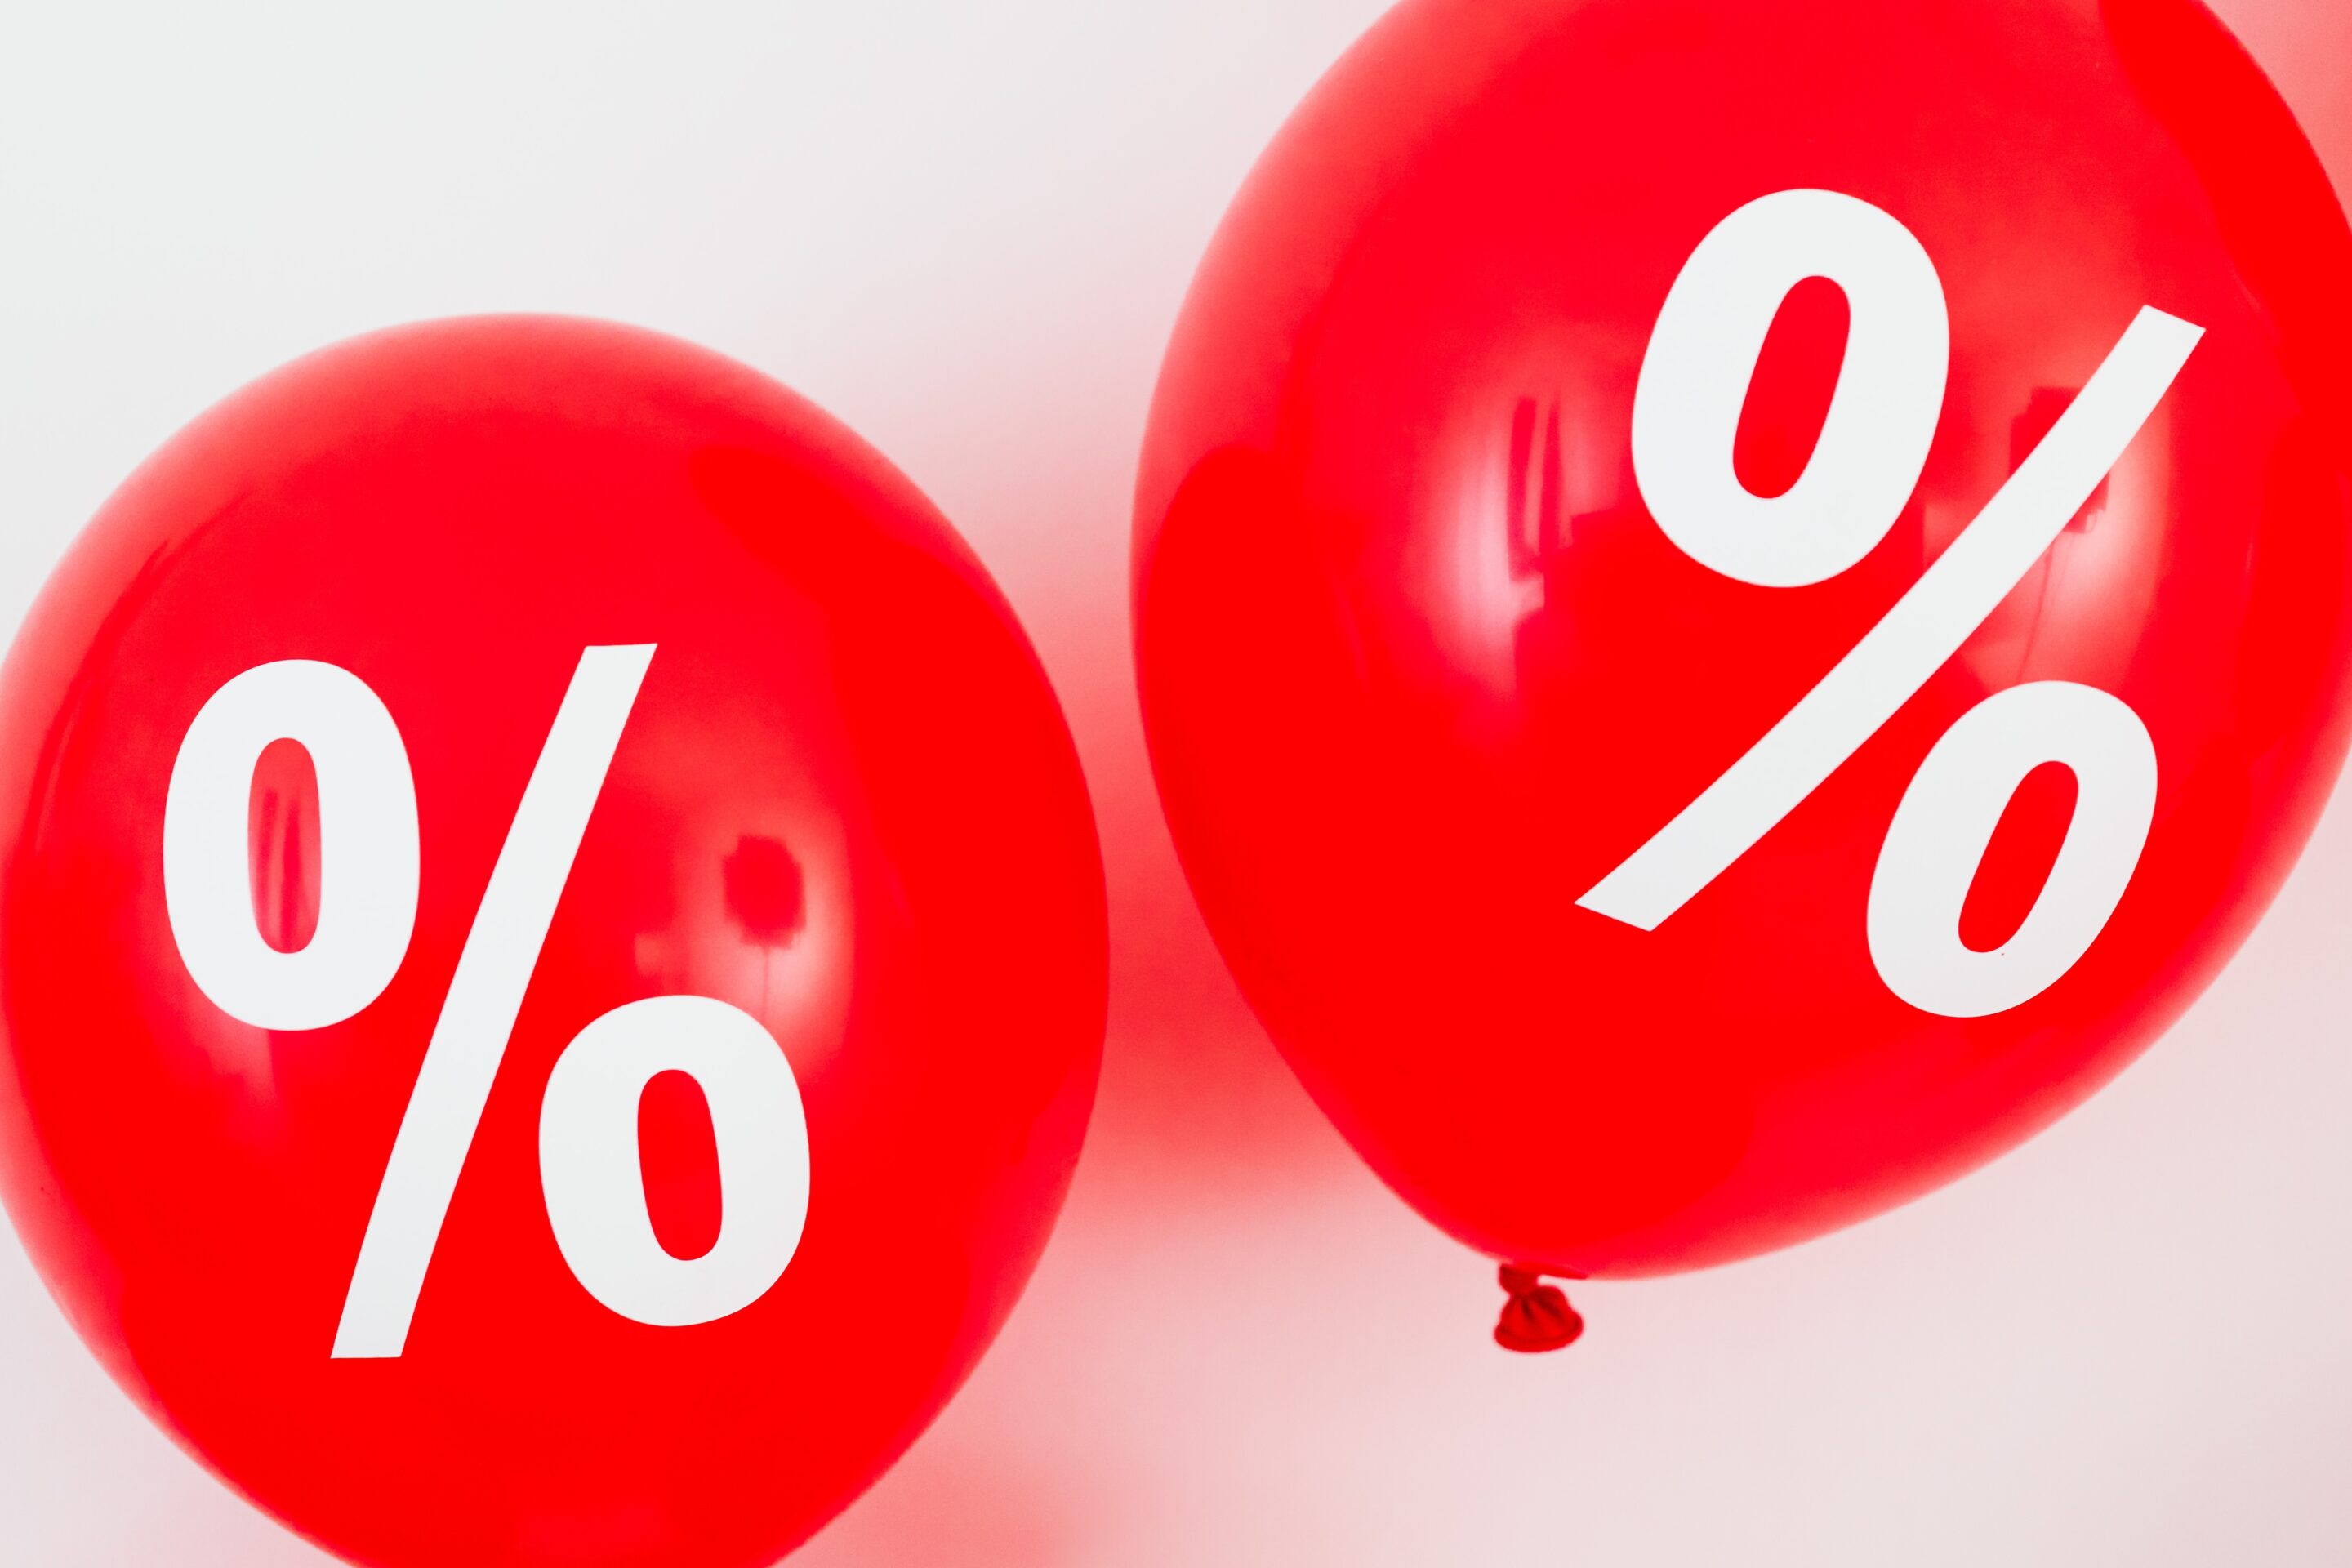 Two red balloons with percent signs painted on them - save up to 50% with Black Friday broadband promotions